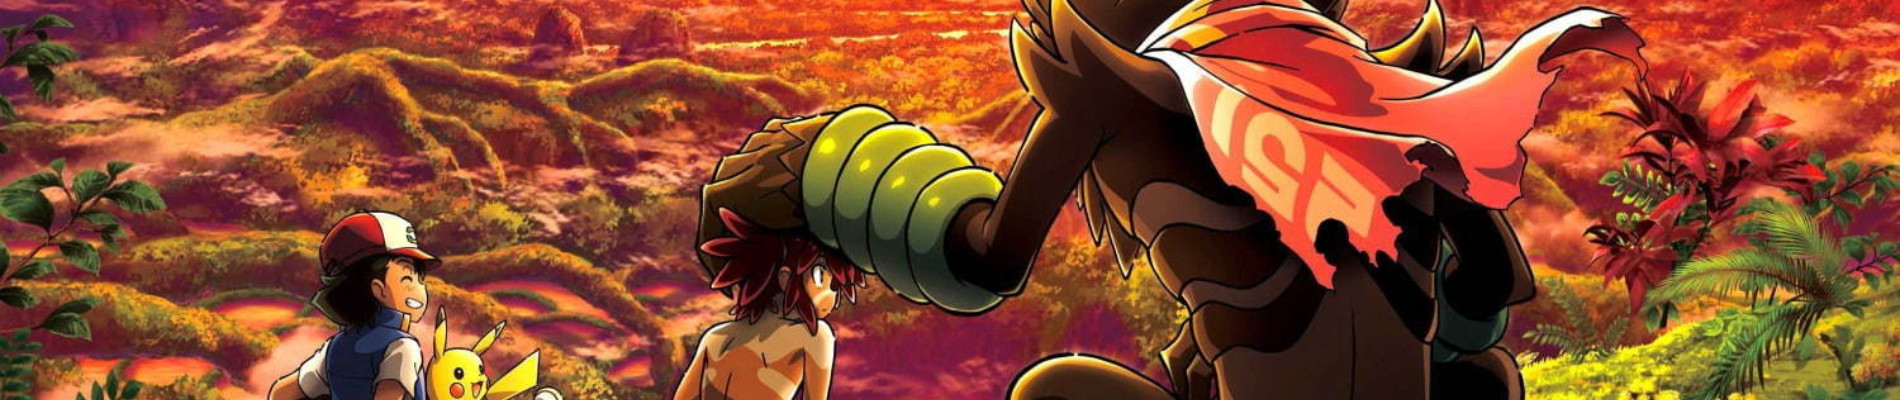 Banner for Pokémon the Movie: Secrets of the Jungle